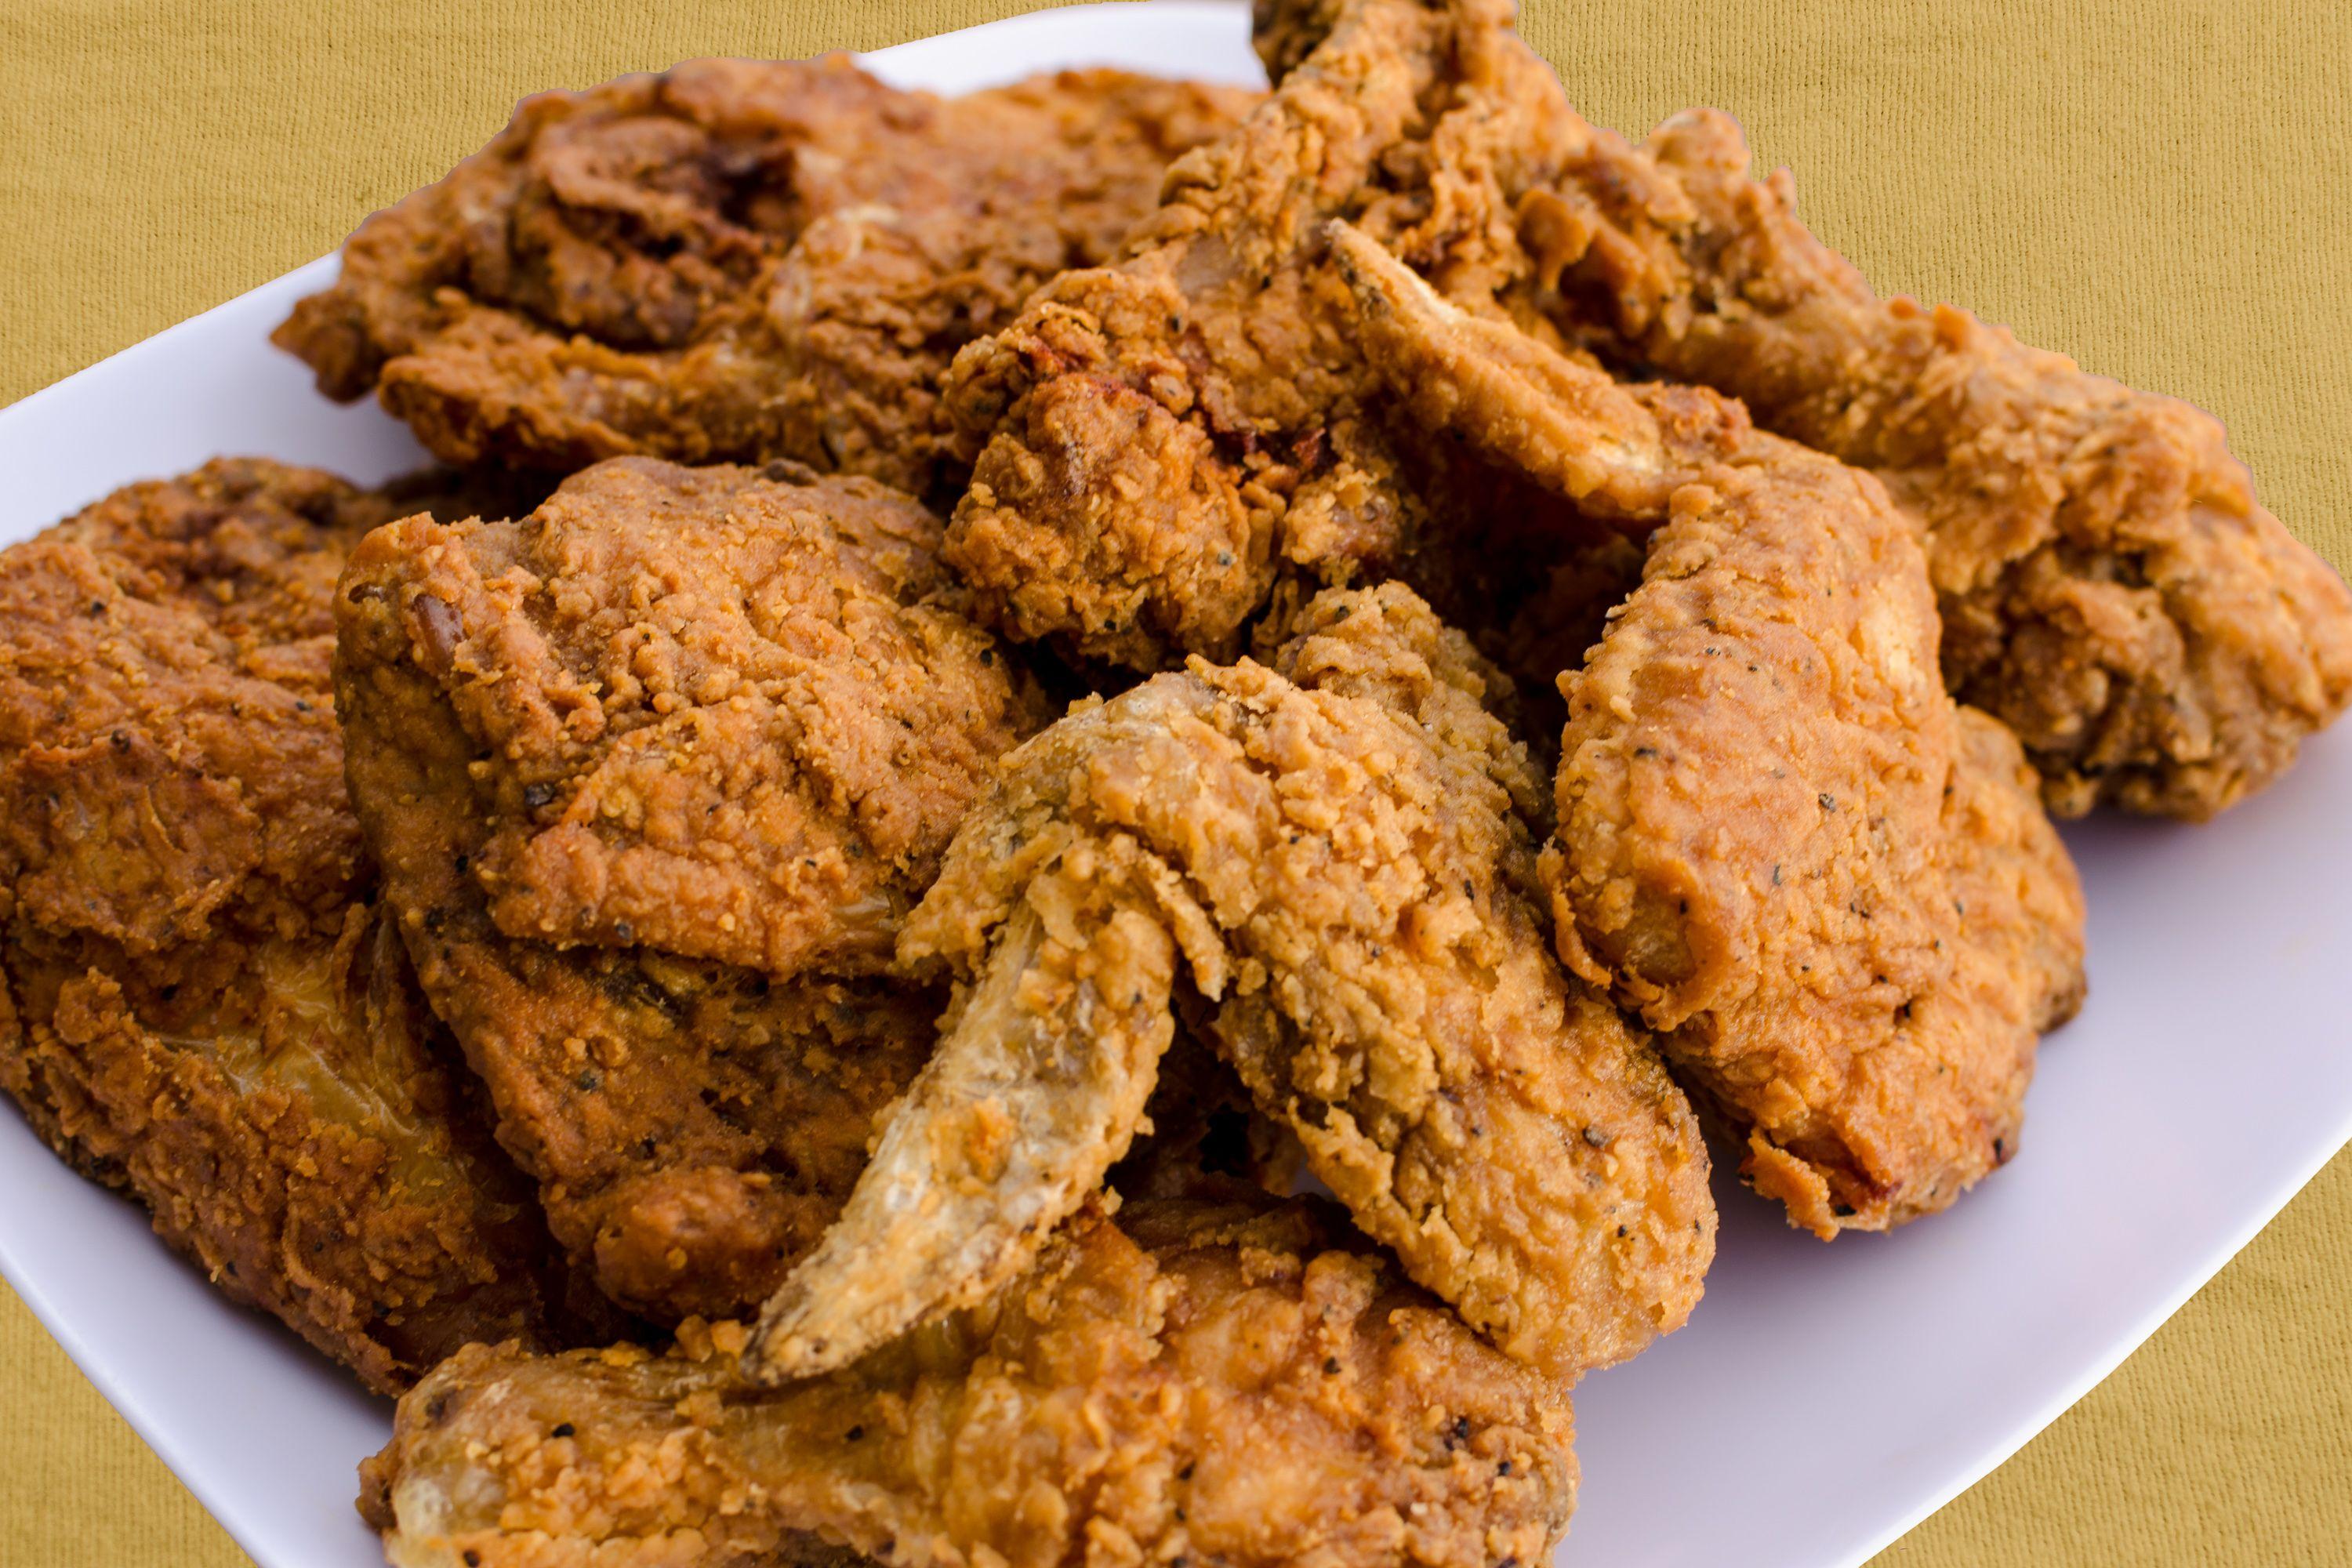 How to Season Flour for Fried Chicken